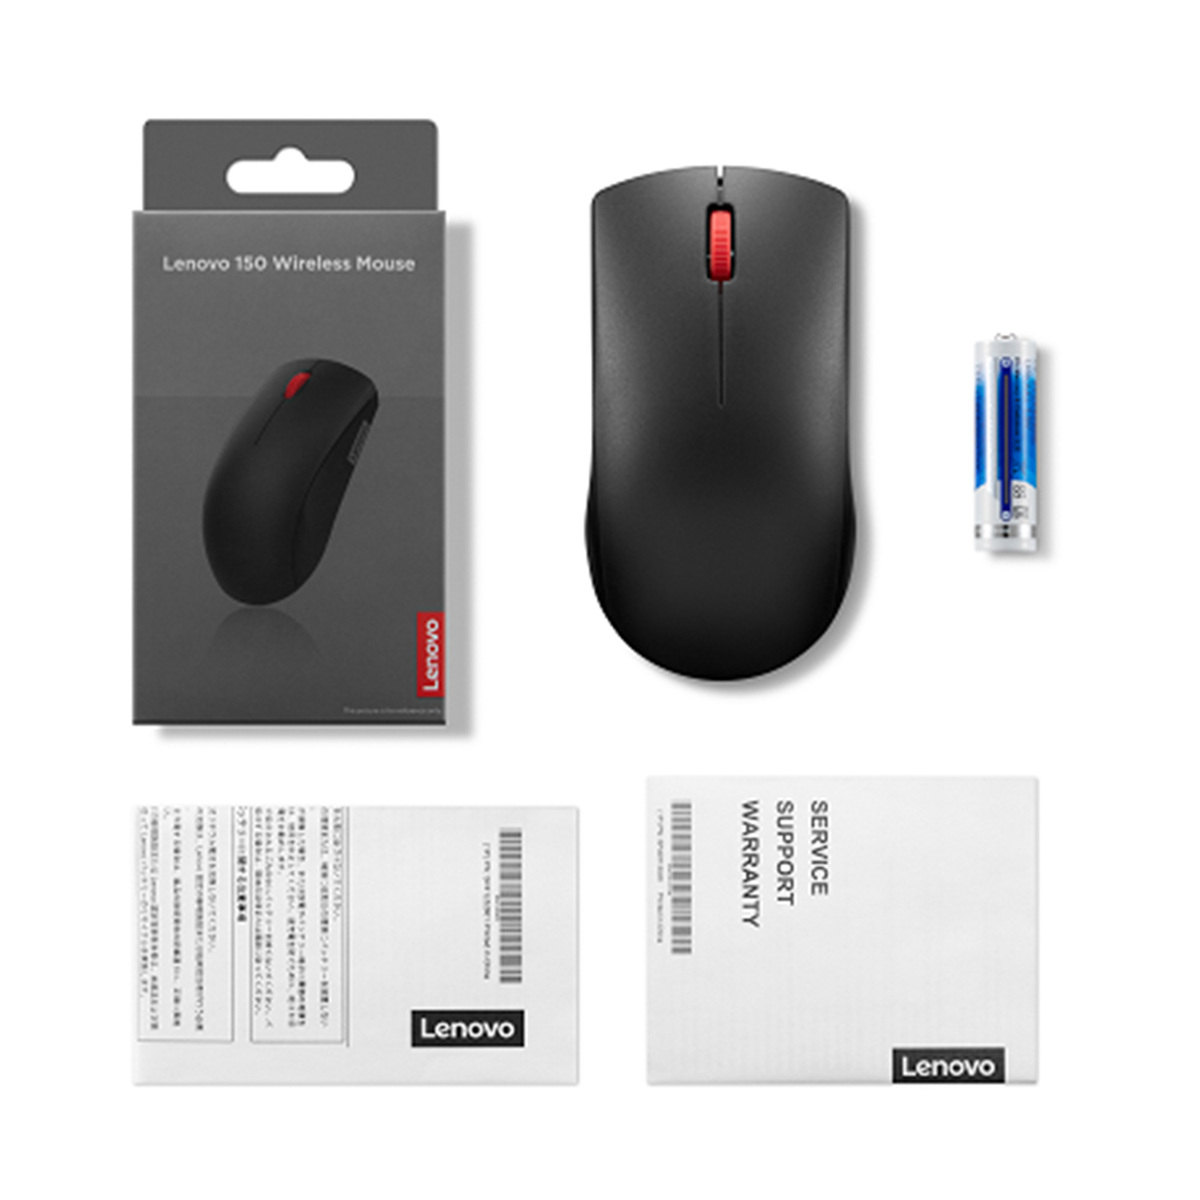 Lenovo 15.6 inch Laptop Casual Toploader, Grey, T210 + Lenovo 150 Wireless Mouse, Black, GY51L52638